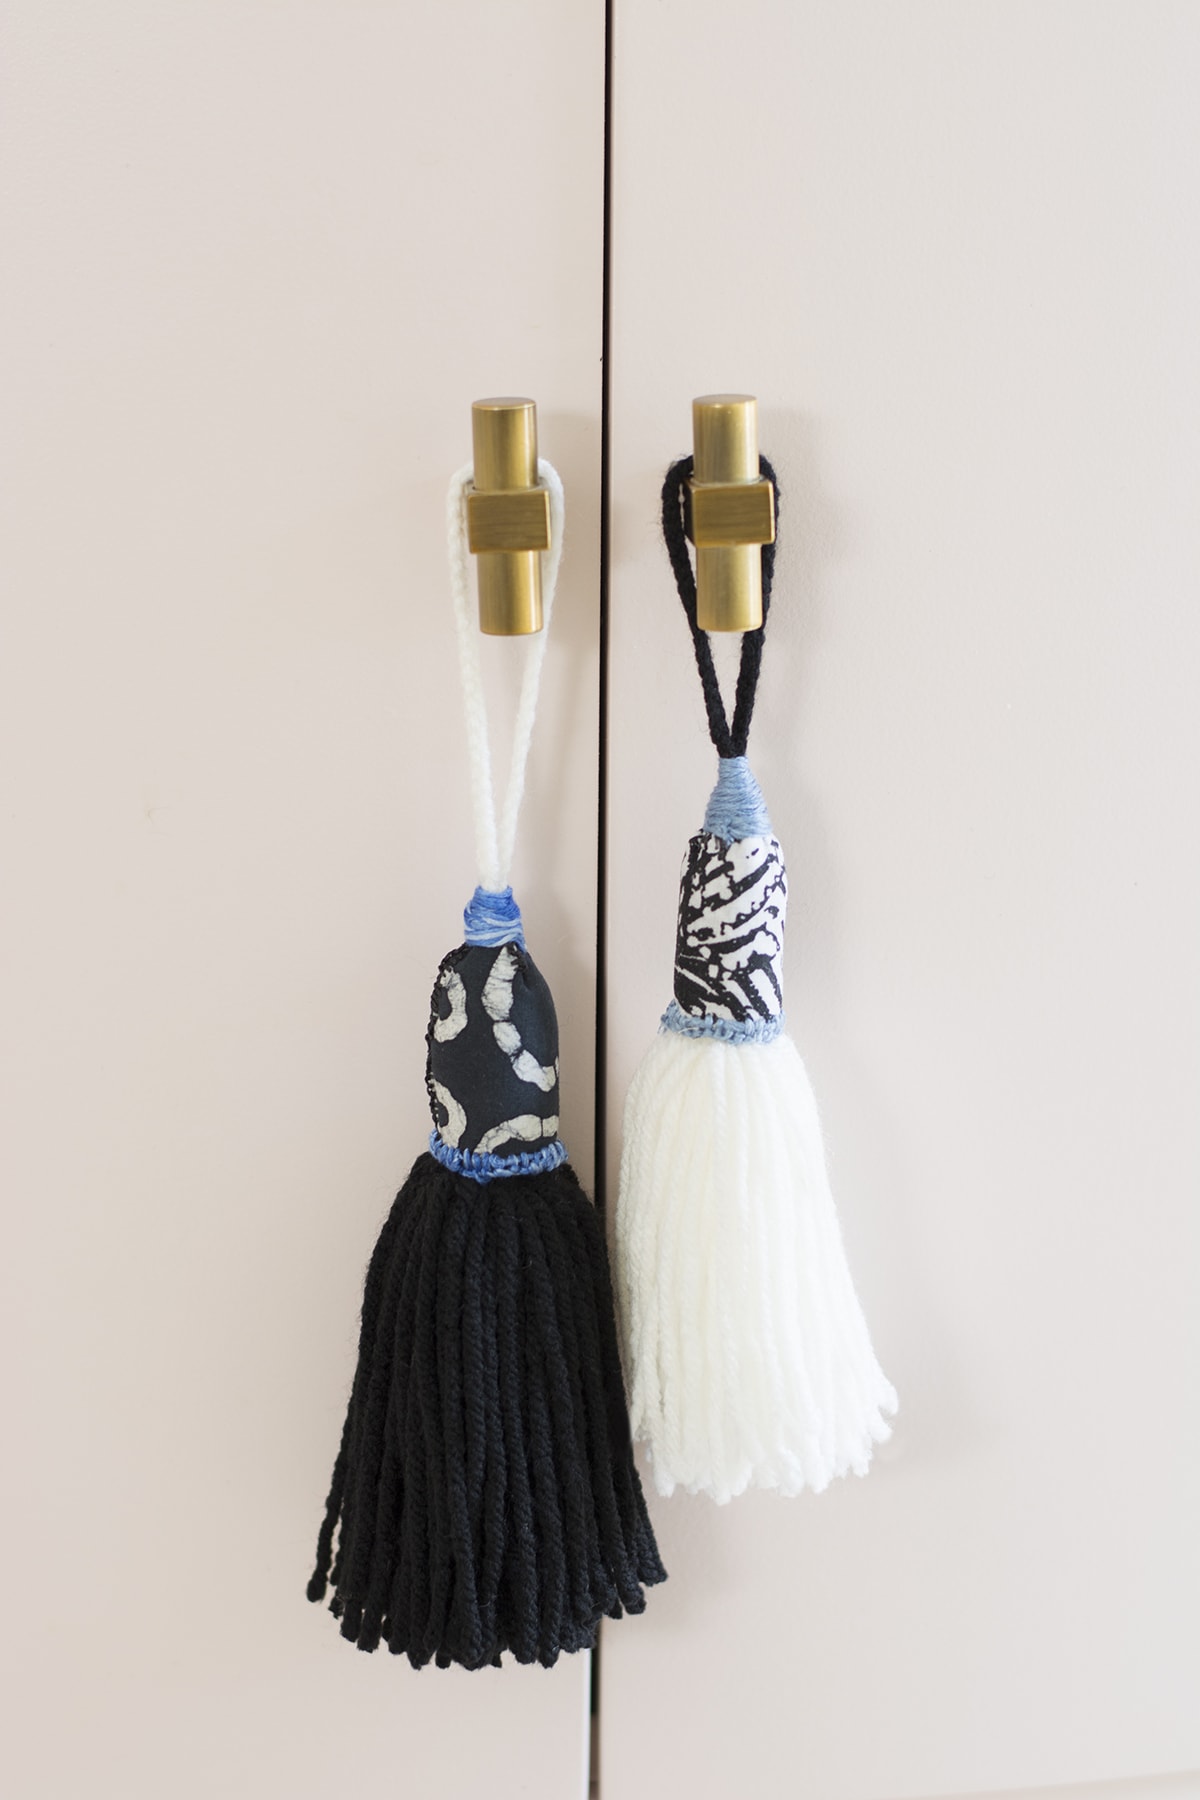 How to make yarn tassels for your cabinet hardware